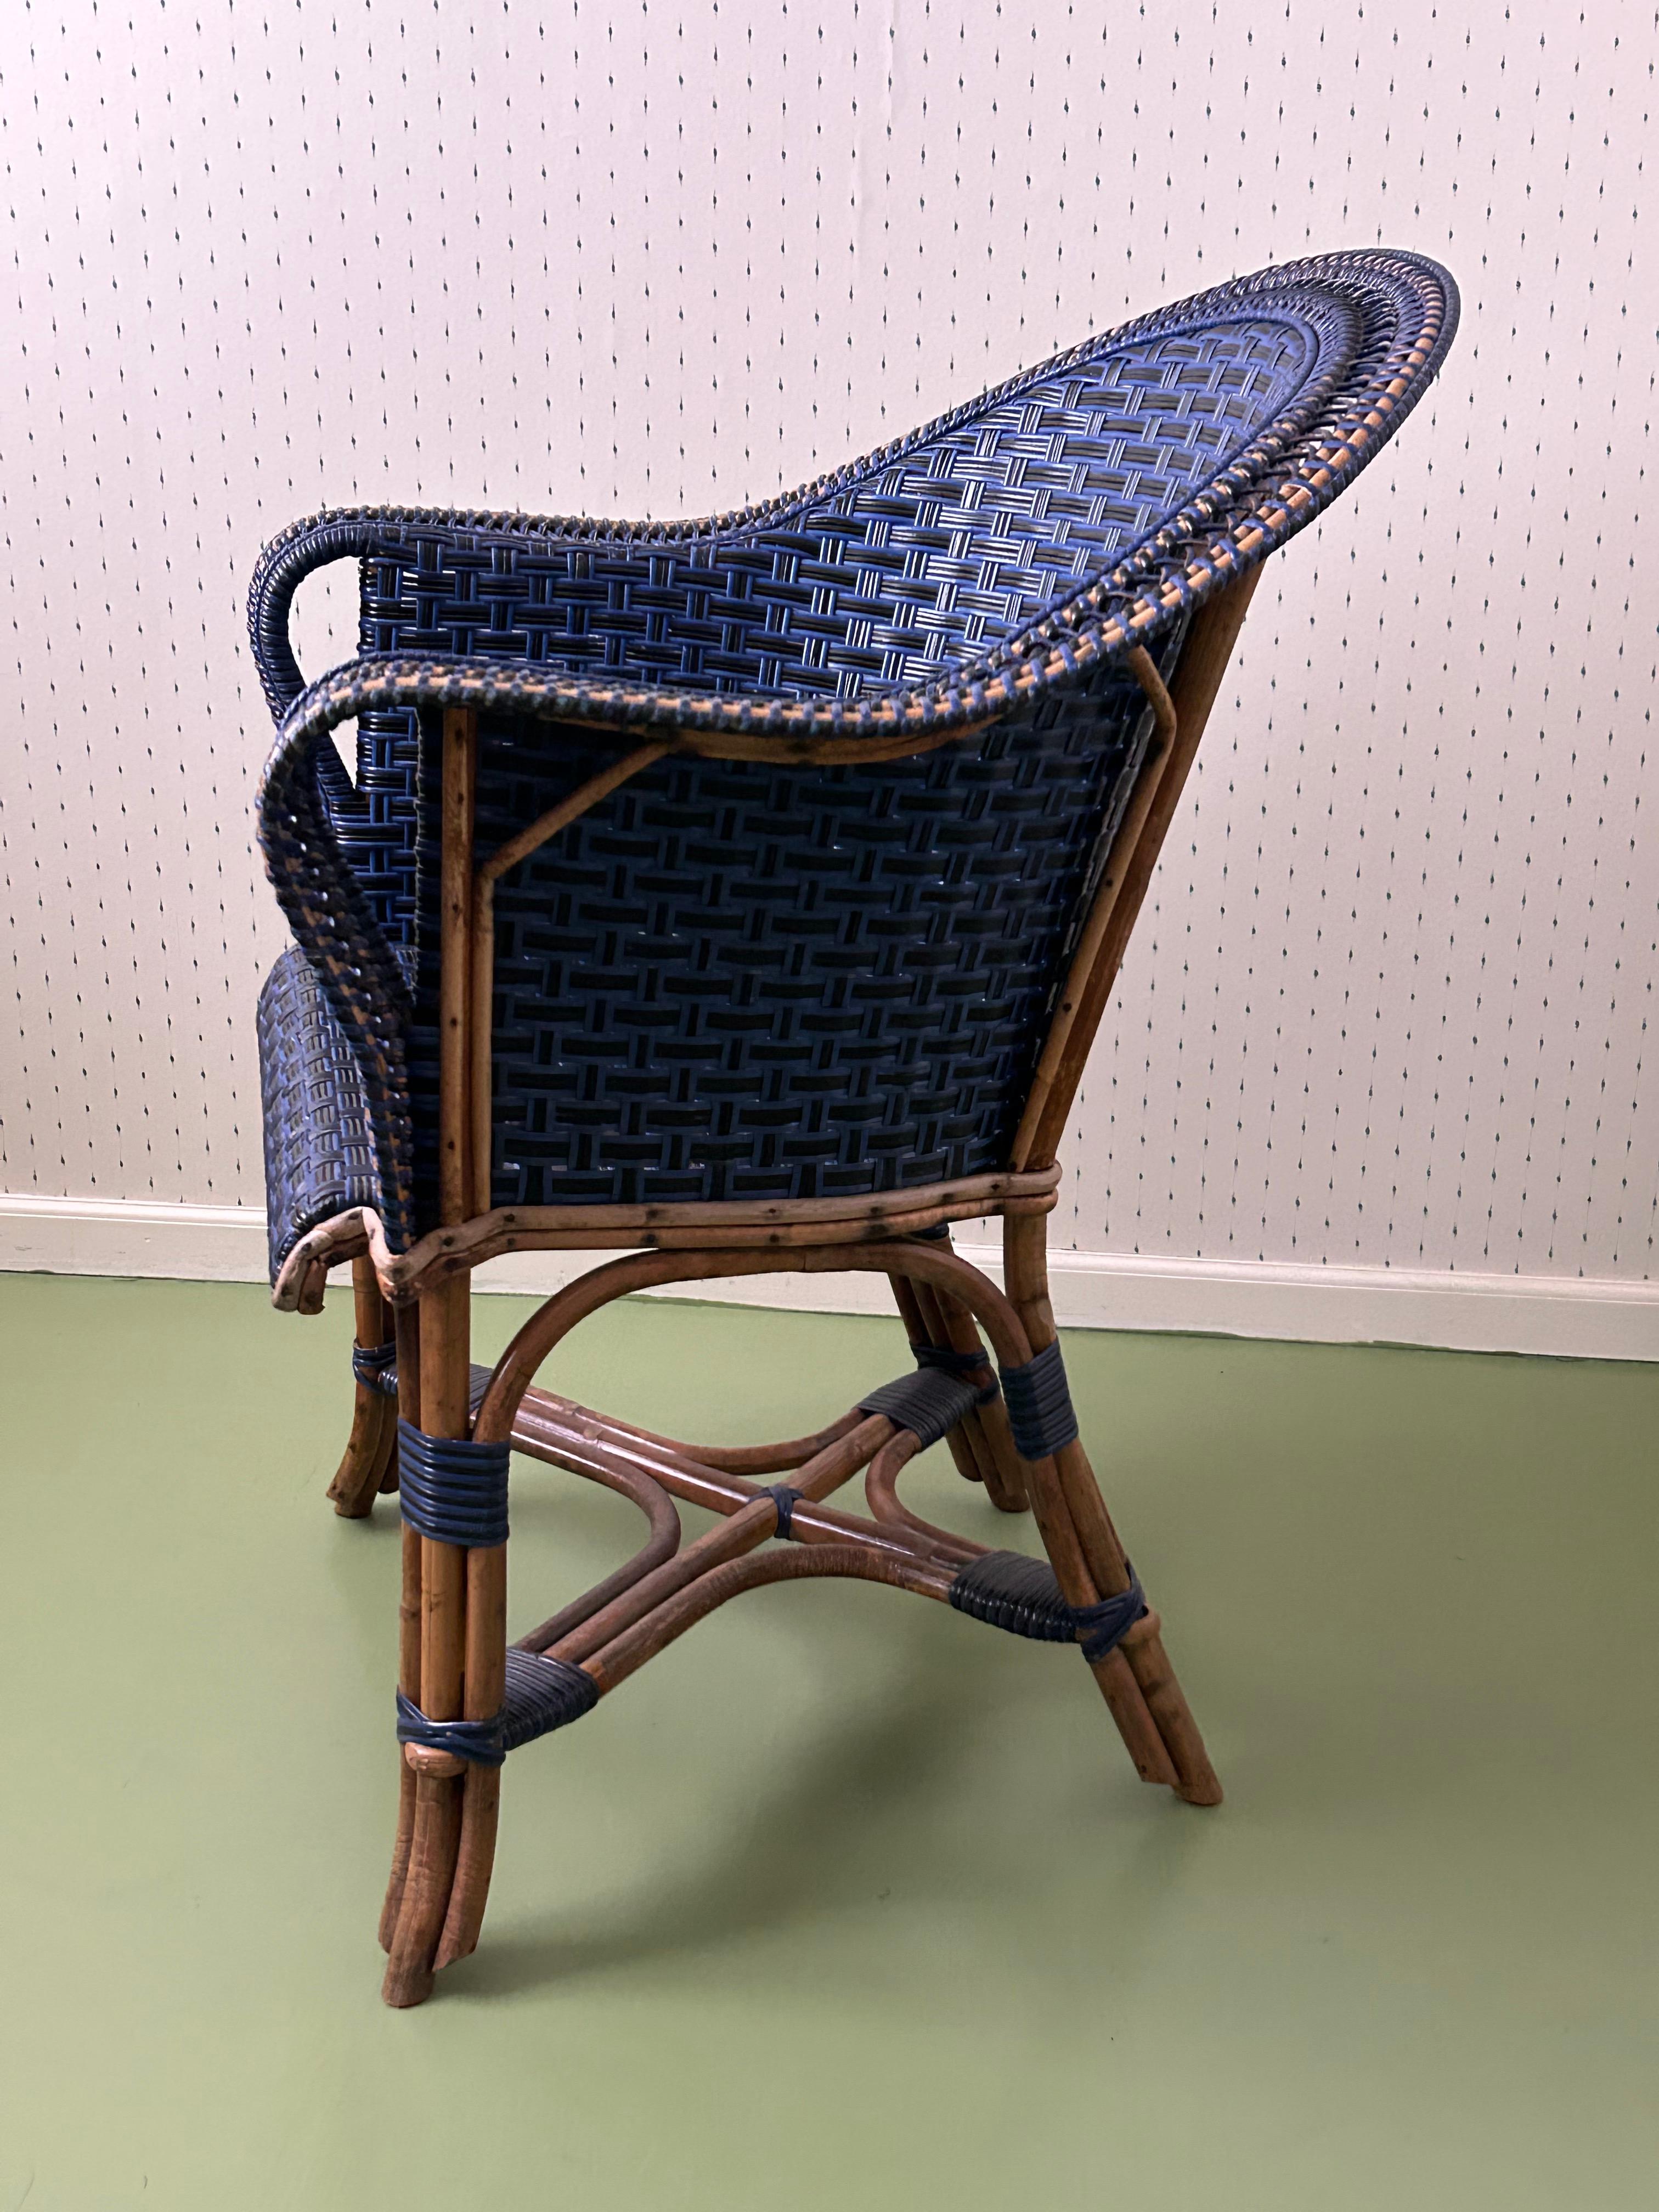 Vintage Rattan Chair in Black and Blue, France, Early 20th Century For Sale 7